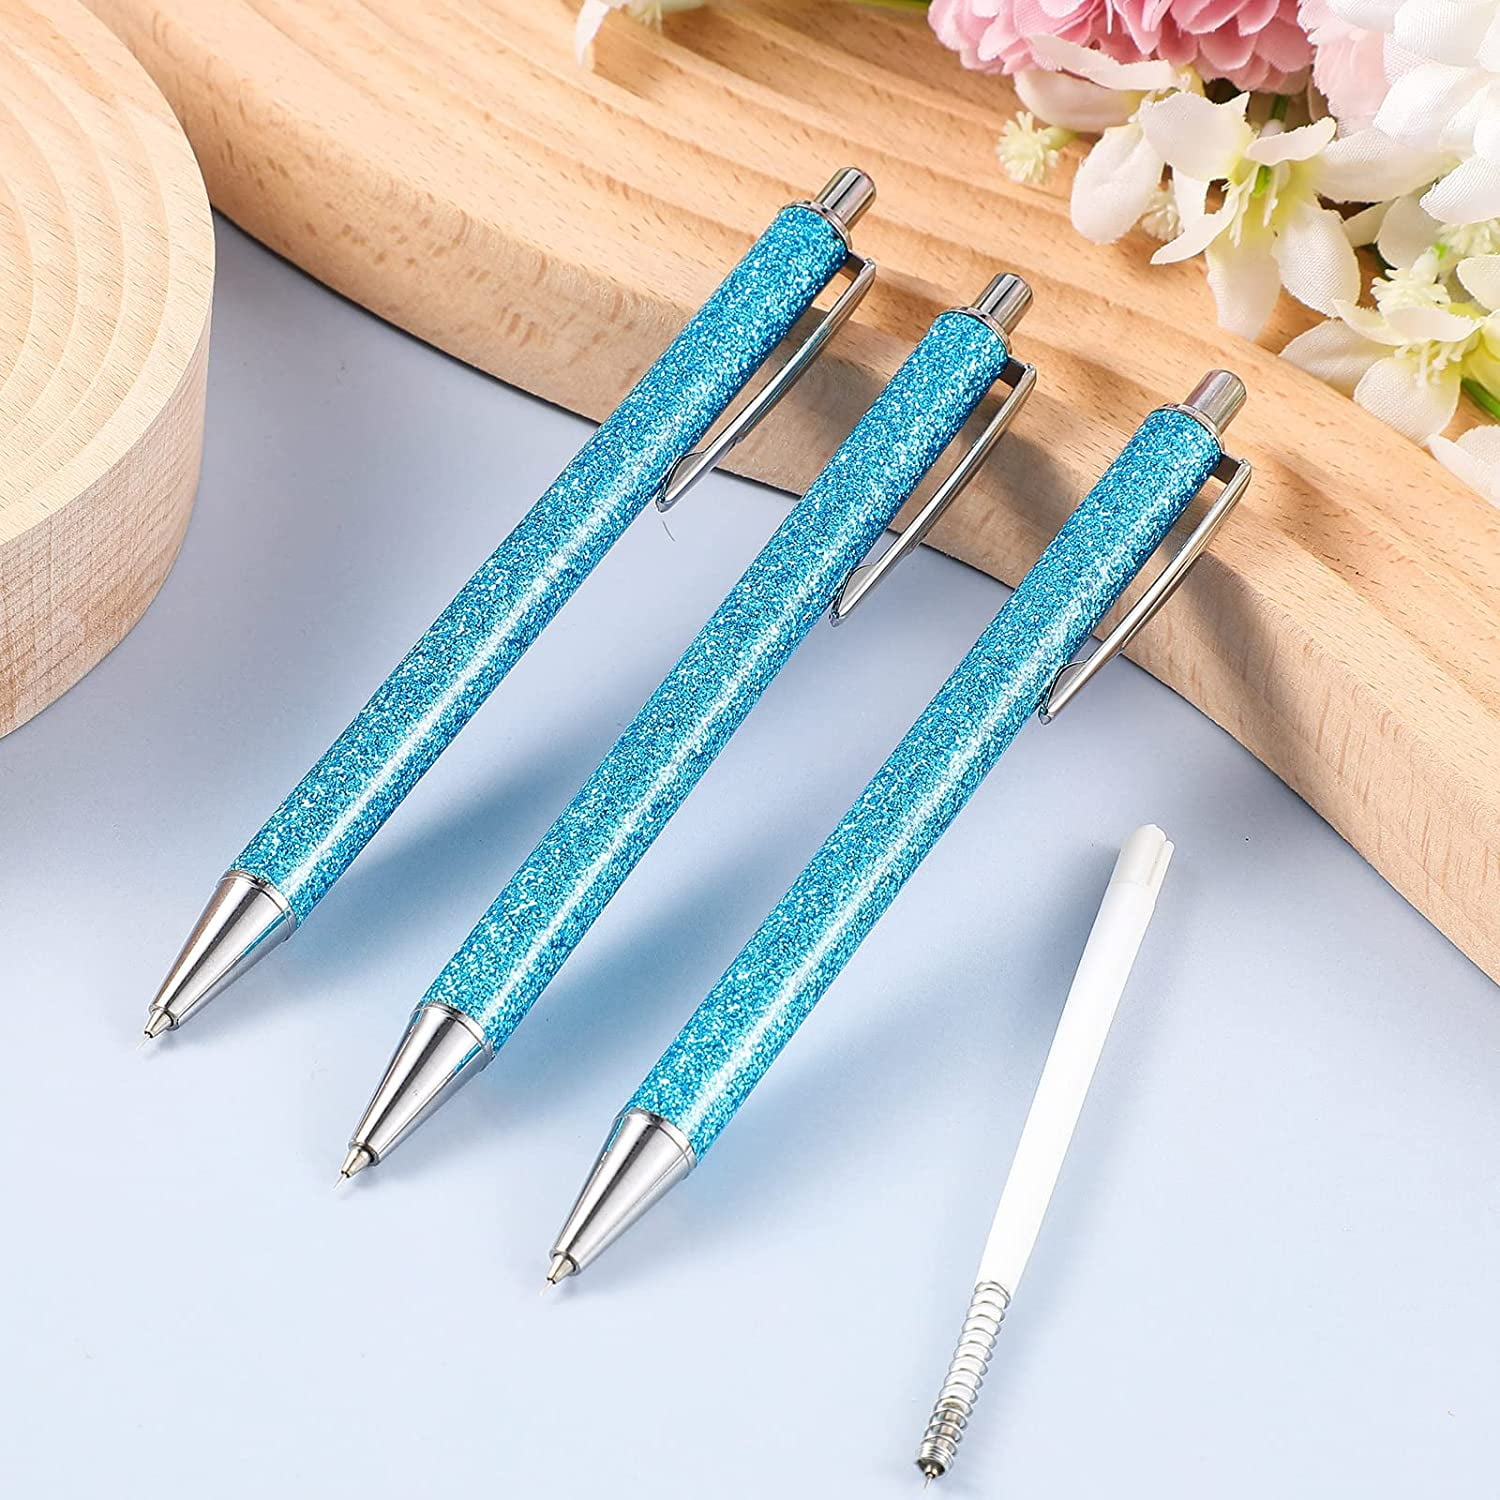  3 Pieces Weeding Tool for Vinyl, Precision Pin Pen Weeding Pen  Tools Quick Air Release Tool Pinpen Vinyl Pen Weeder Touch Screen Pen  (Solid Color, 3) : Arts, Crafts & Sewing